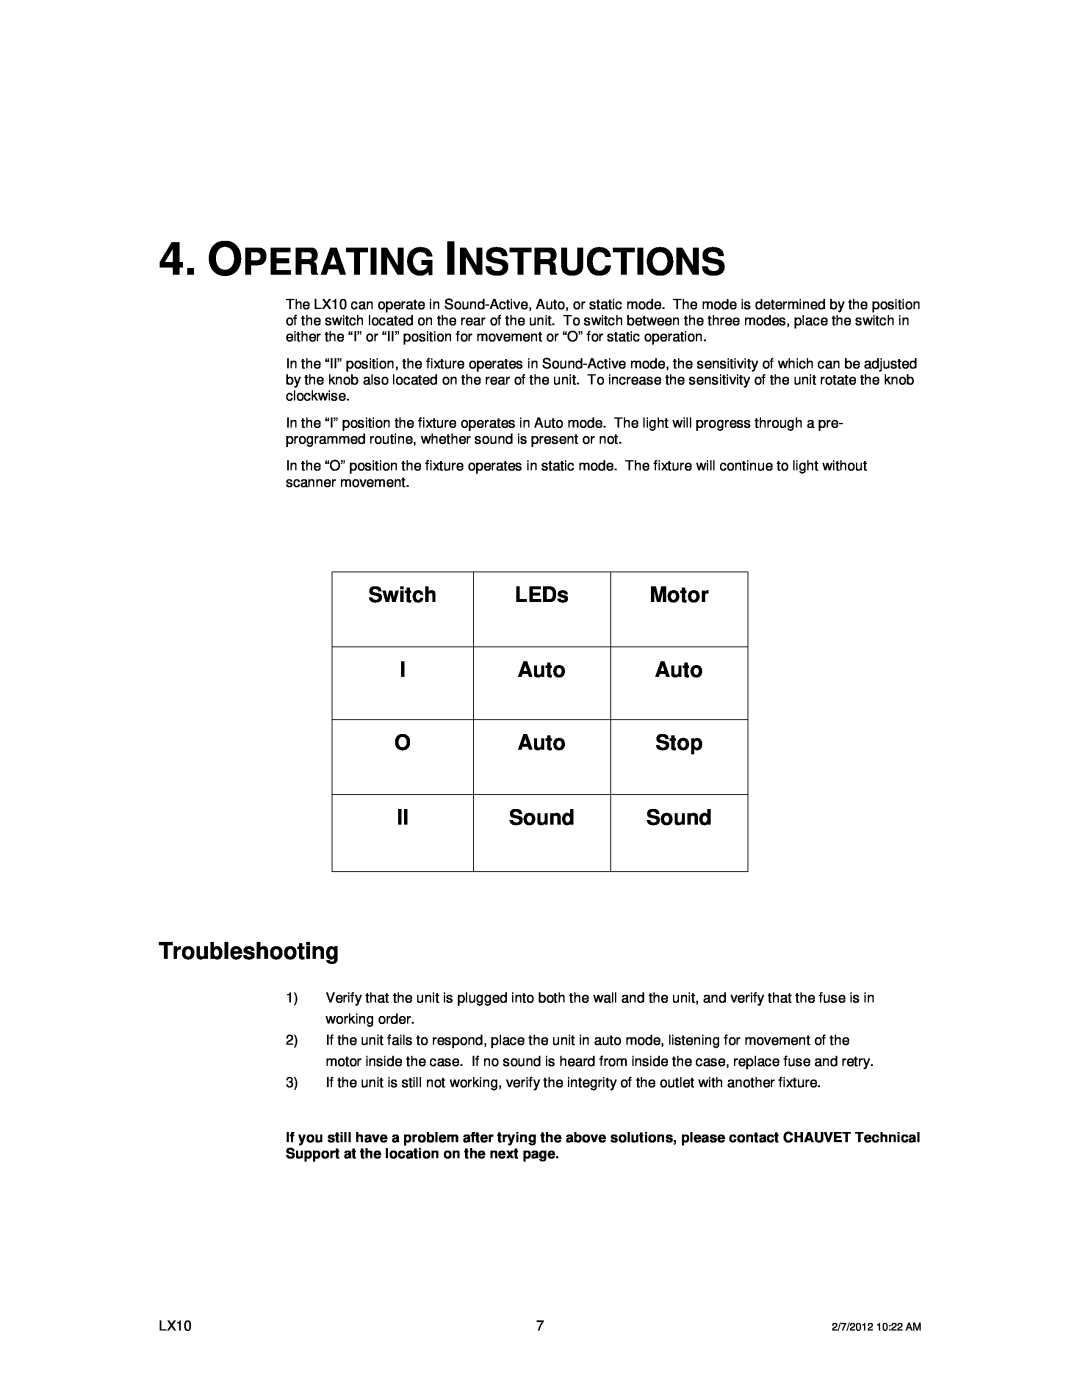 Chauvet LX10 user manual Operating Instructions, Troubleshooting, Switch, LEDs, Motor, Auto, Stop 